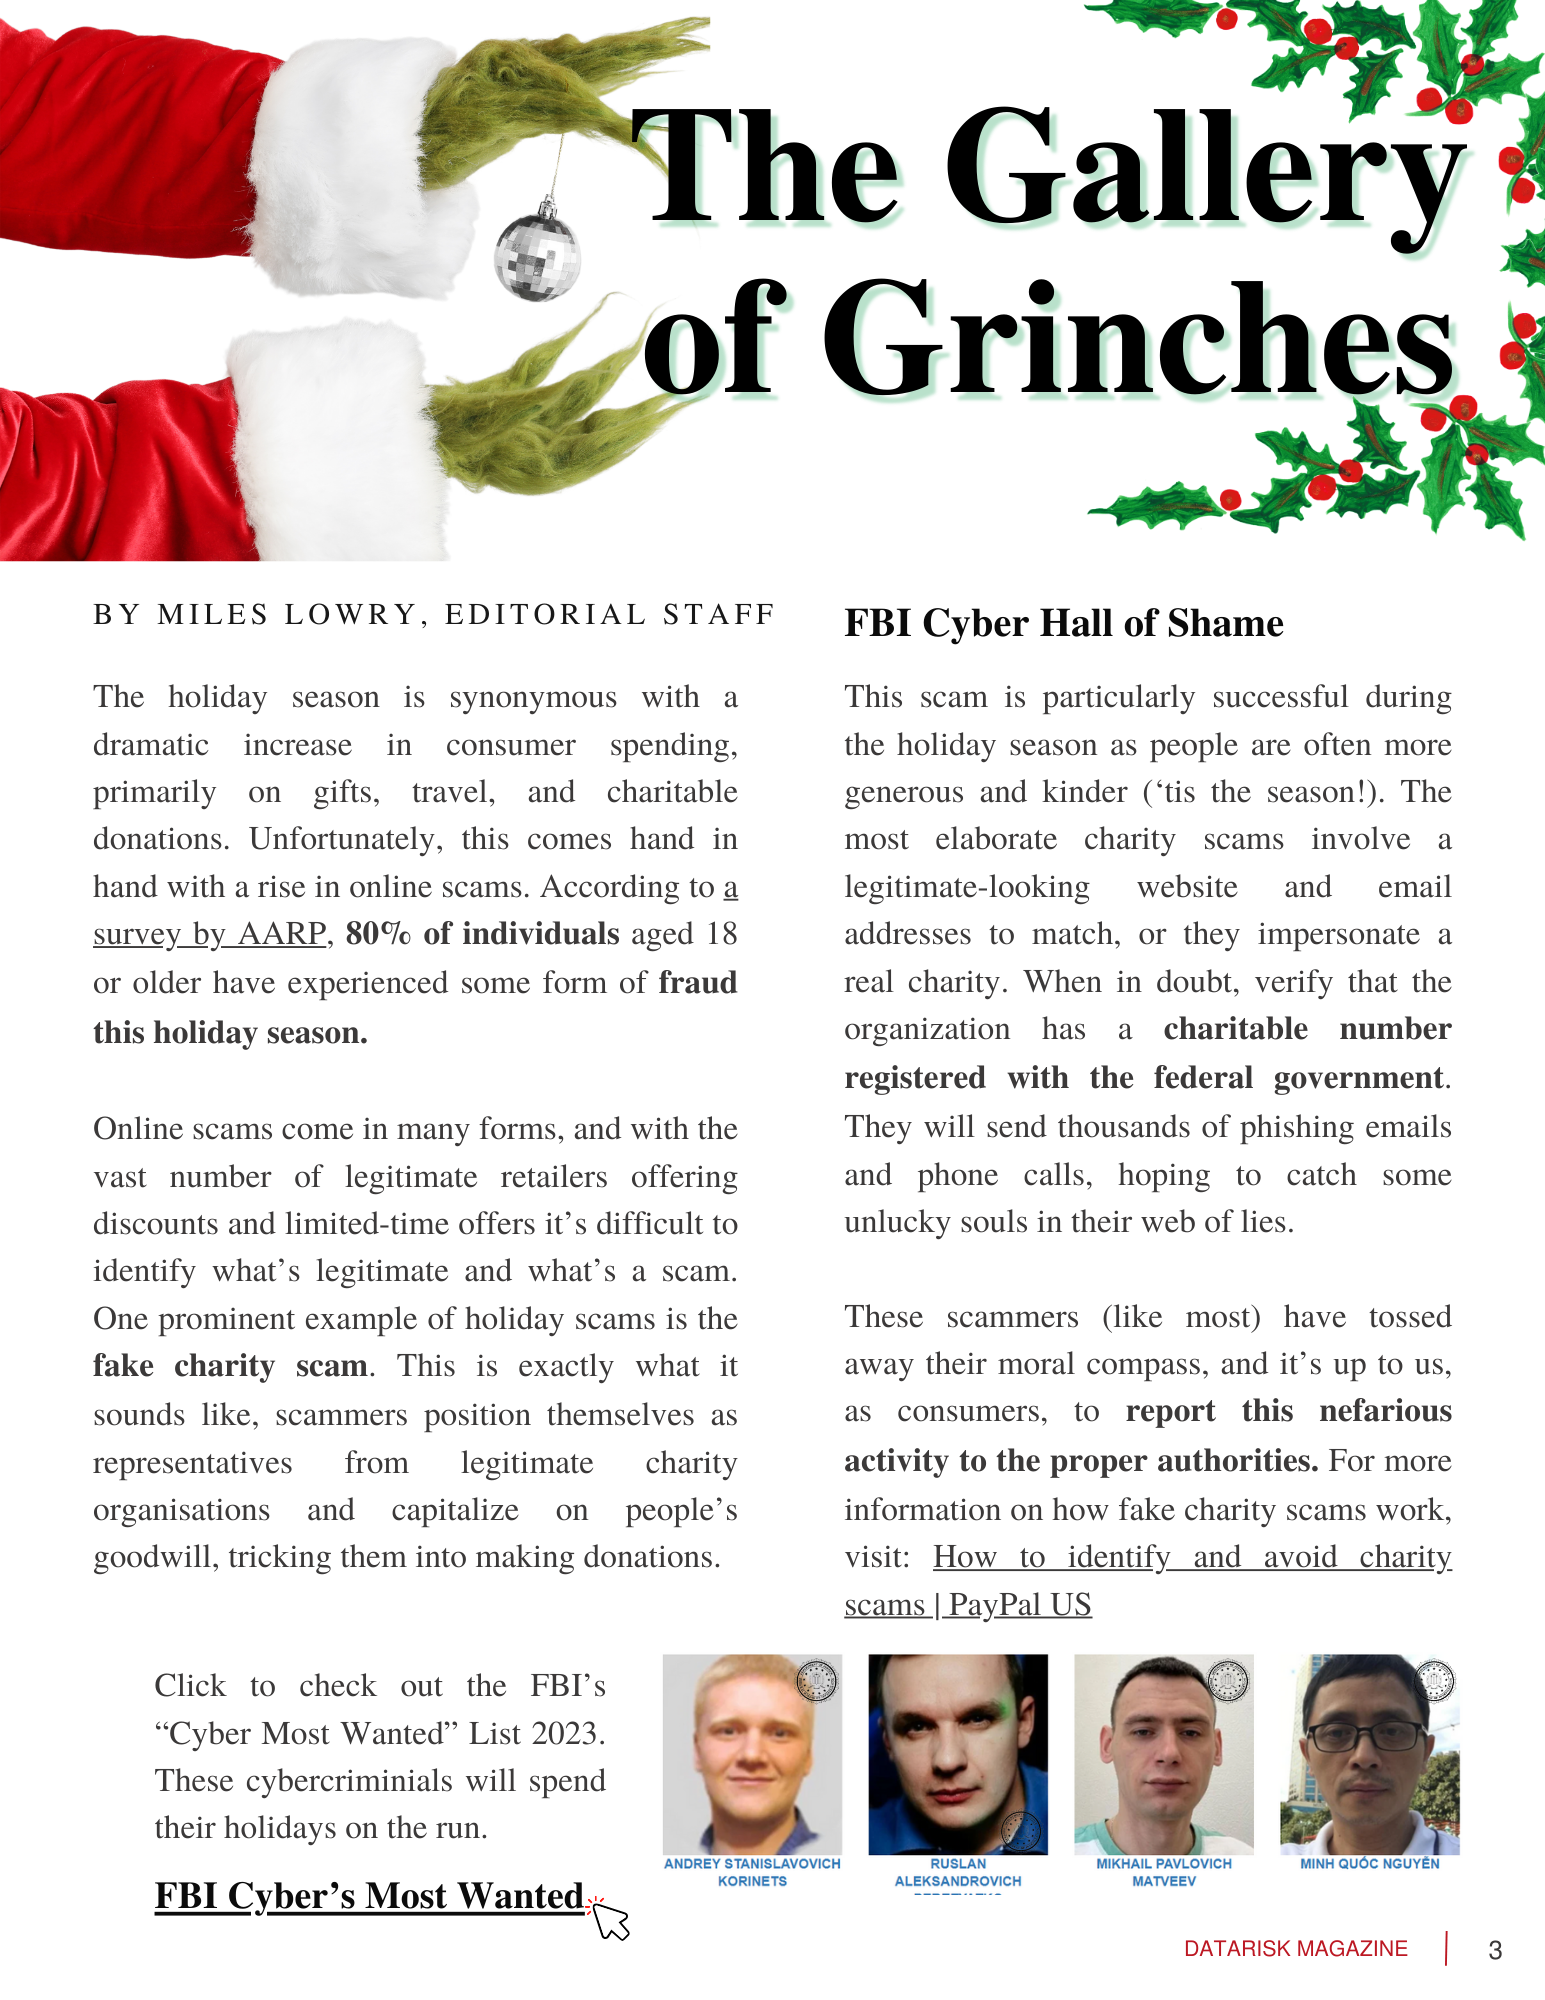 Article 2 Gallery of Grinches